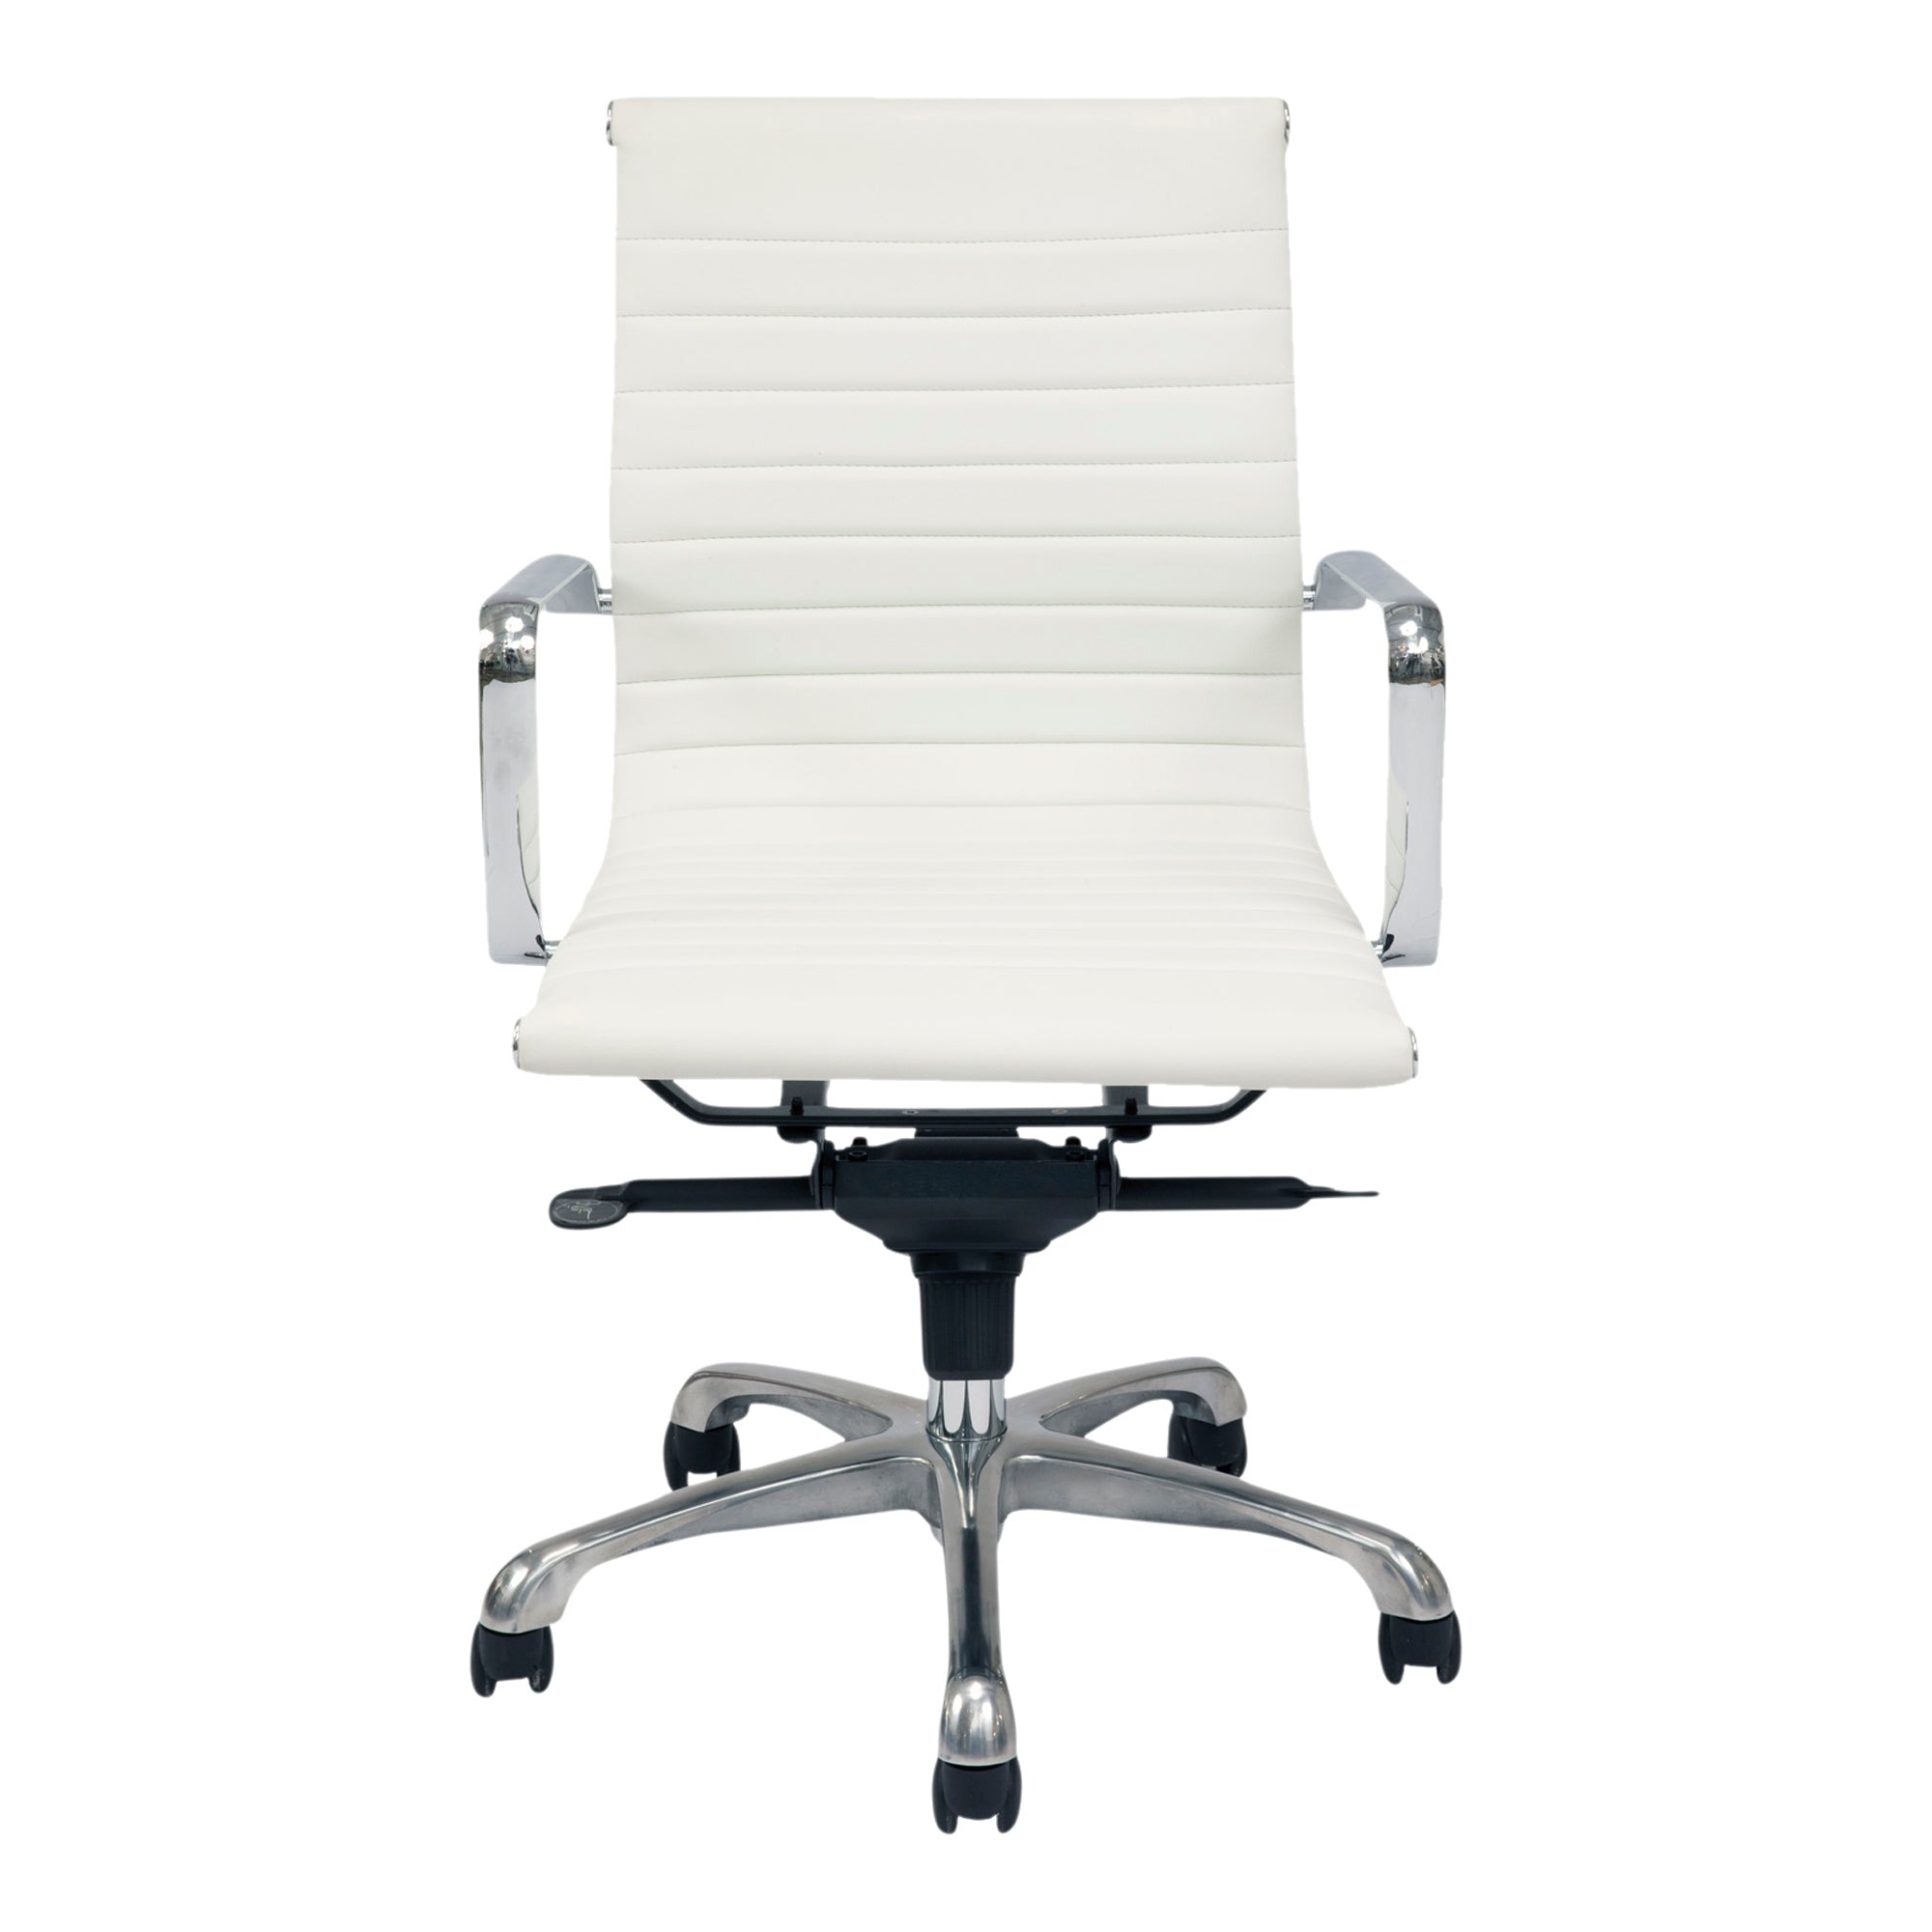 Studio Office Chair Low Back White Vegan Leather